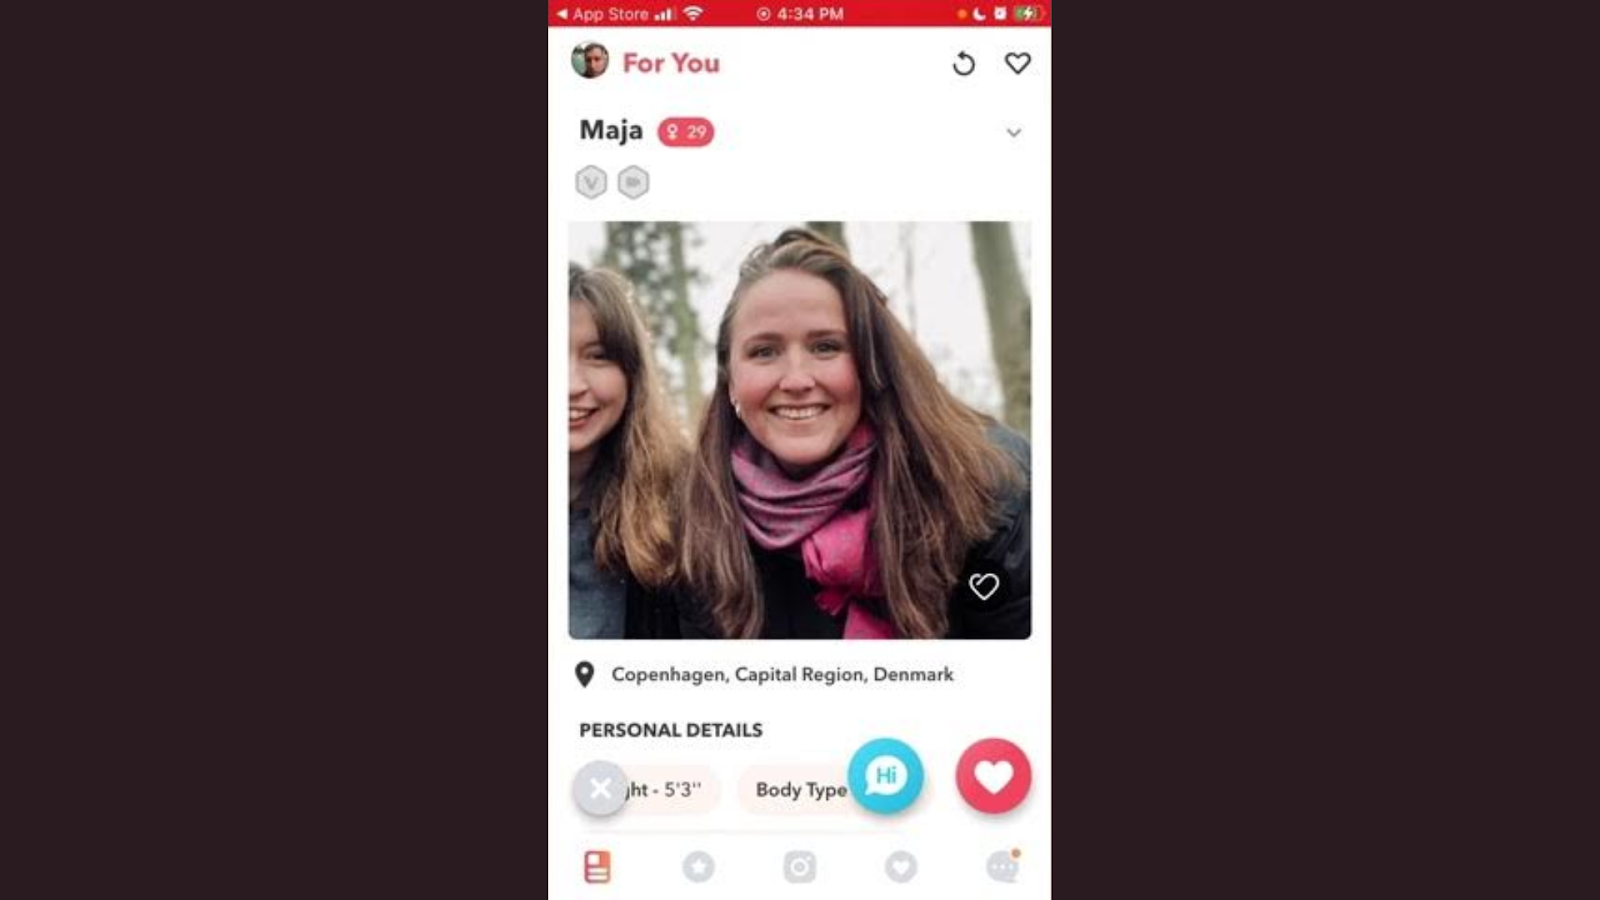 WooPlus – Dating App for Curvy